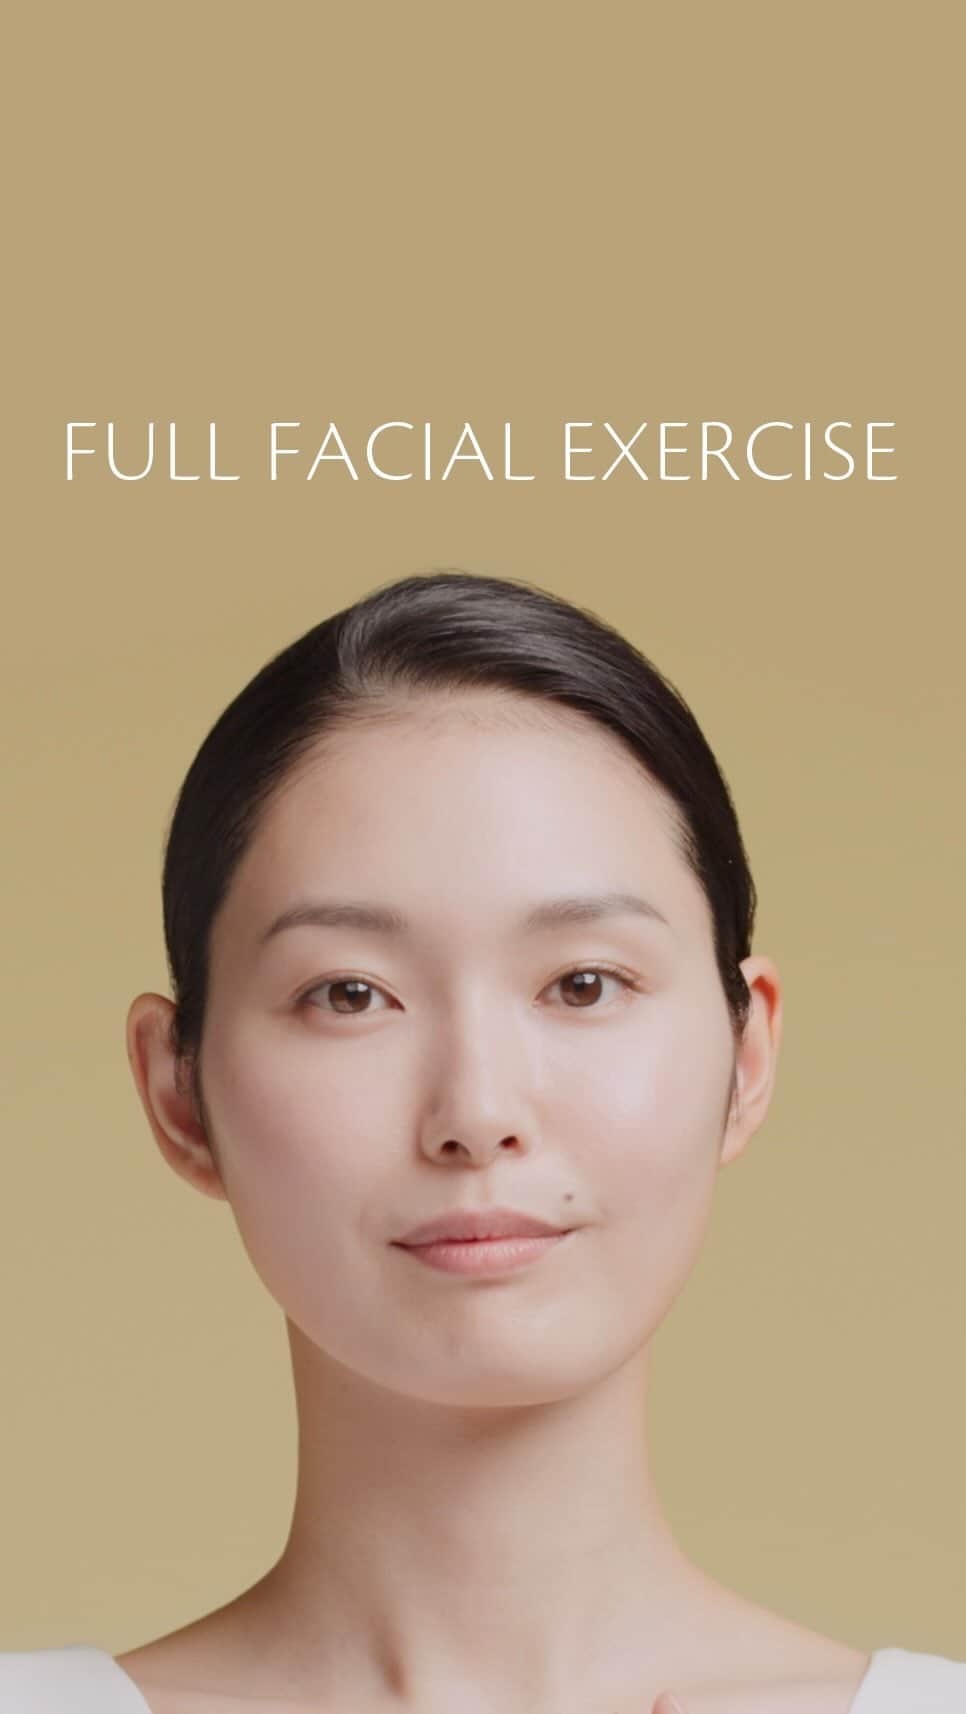 Clé de Peau Beauté Officialのインスタグラム：「If you love our #SupremeAgeArtisans series–the specialized collection designed to firm up your face– you’ll love the facial exercise that goes along with it. The Full Facial Exercise is like a yoga session for your face, designed to enhance your facial contours, promote circulation and leave you with a radiant, youthful glow ✨Practice every night as the last step in your regimen🤍  クレ・ド・ポー ボーテが研究を尽くした先端の肌サイエンスを集結した、高機能 #エイジングデザインシリーズ で、より積極的なエイジングケア*に取り組むのなら、マッサージを併用することをおすすめします。 独自のマッサージメソッドの融合ですることで、美しさを解き放ちます。お手入れするたび、くっきりと美しい顔立ちへ✨ お手入れの最後のステップとして実践してください🤍  *年齢に応じたうるおいによるお手入れのこと」